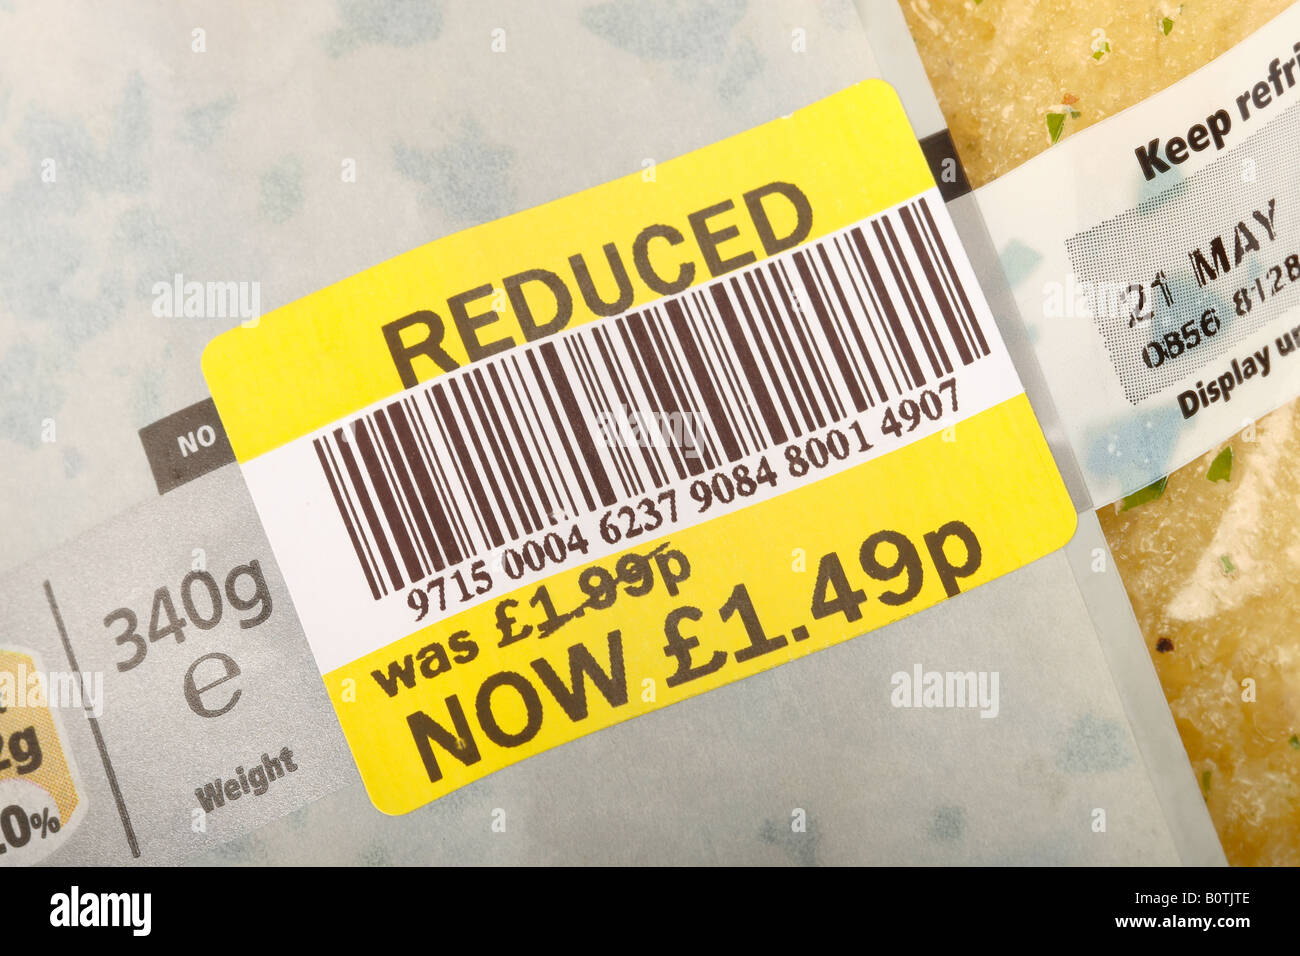 Price-reduced supermarket discounts